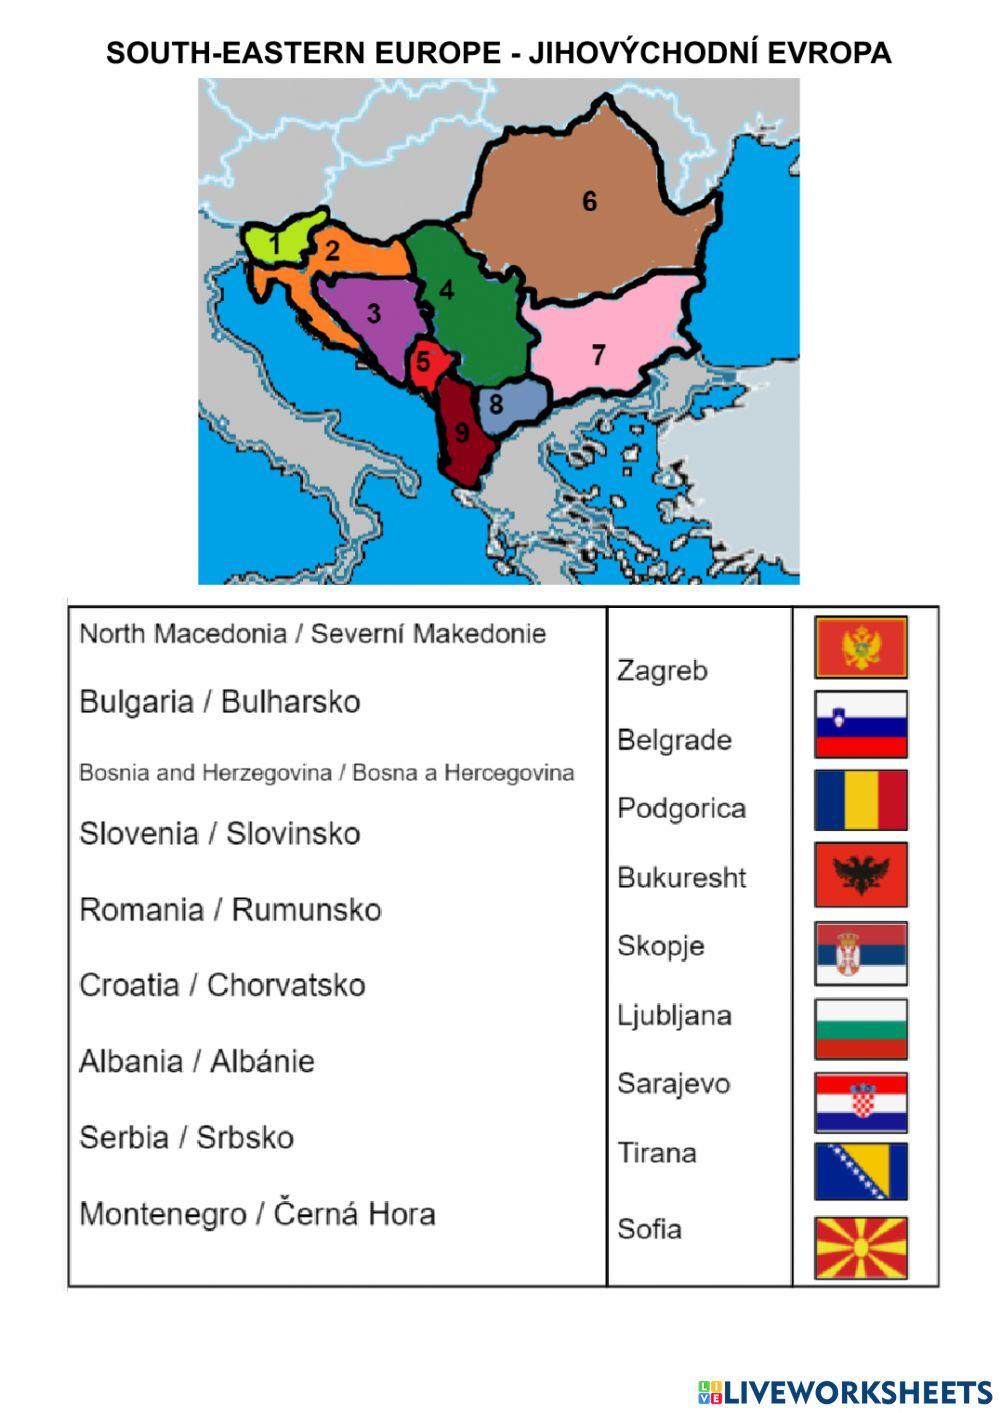 South-eastern Europe